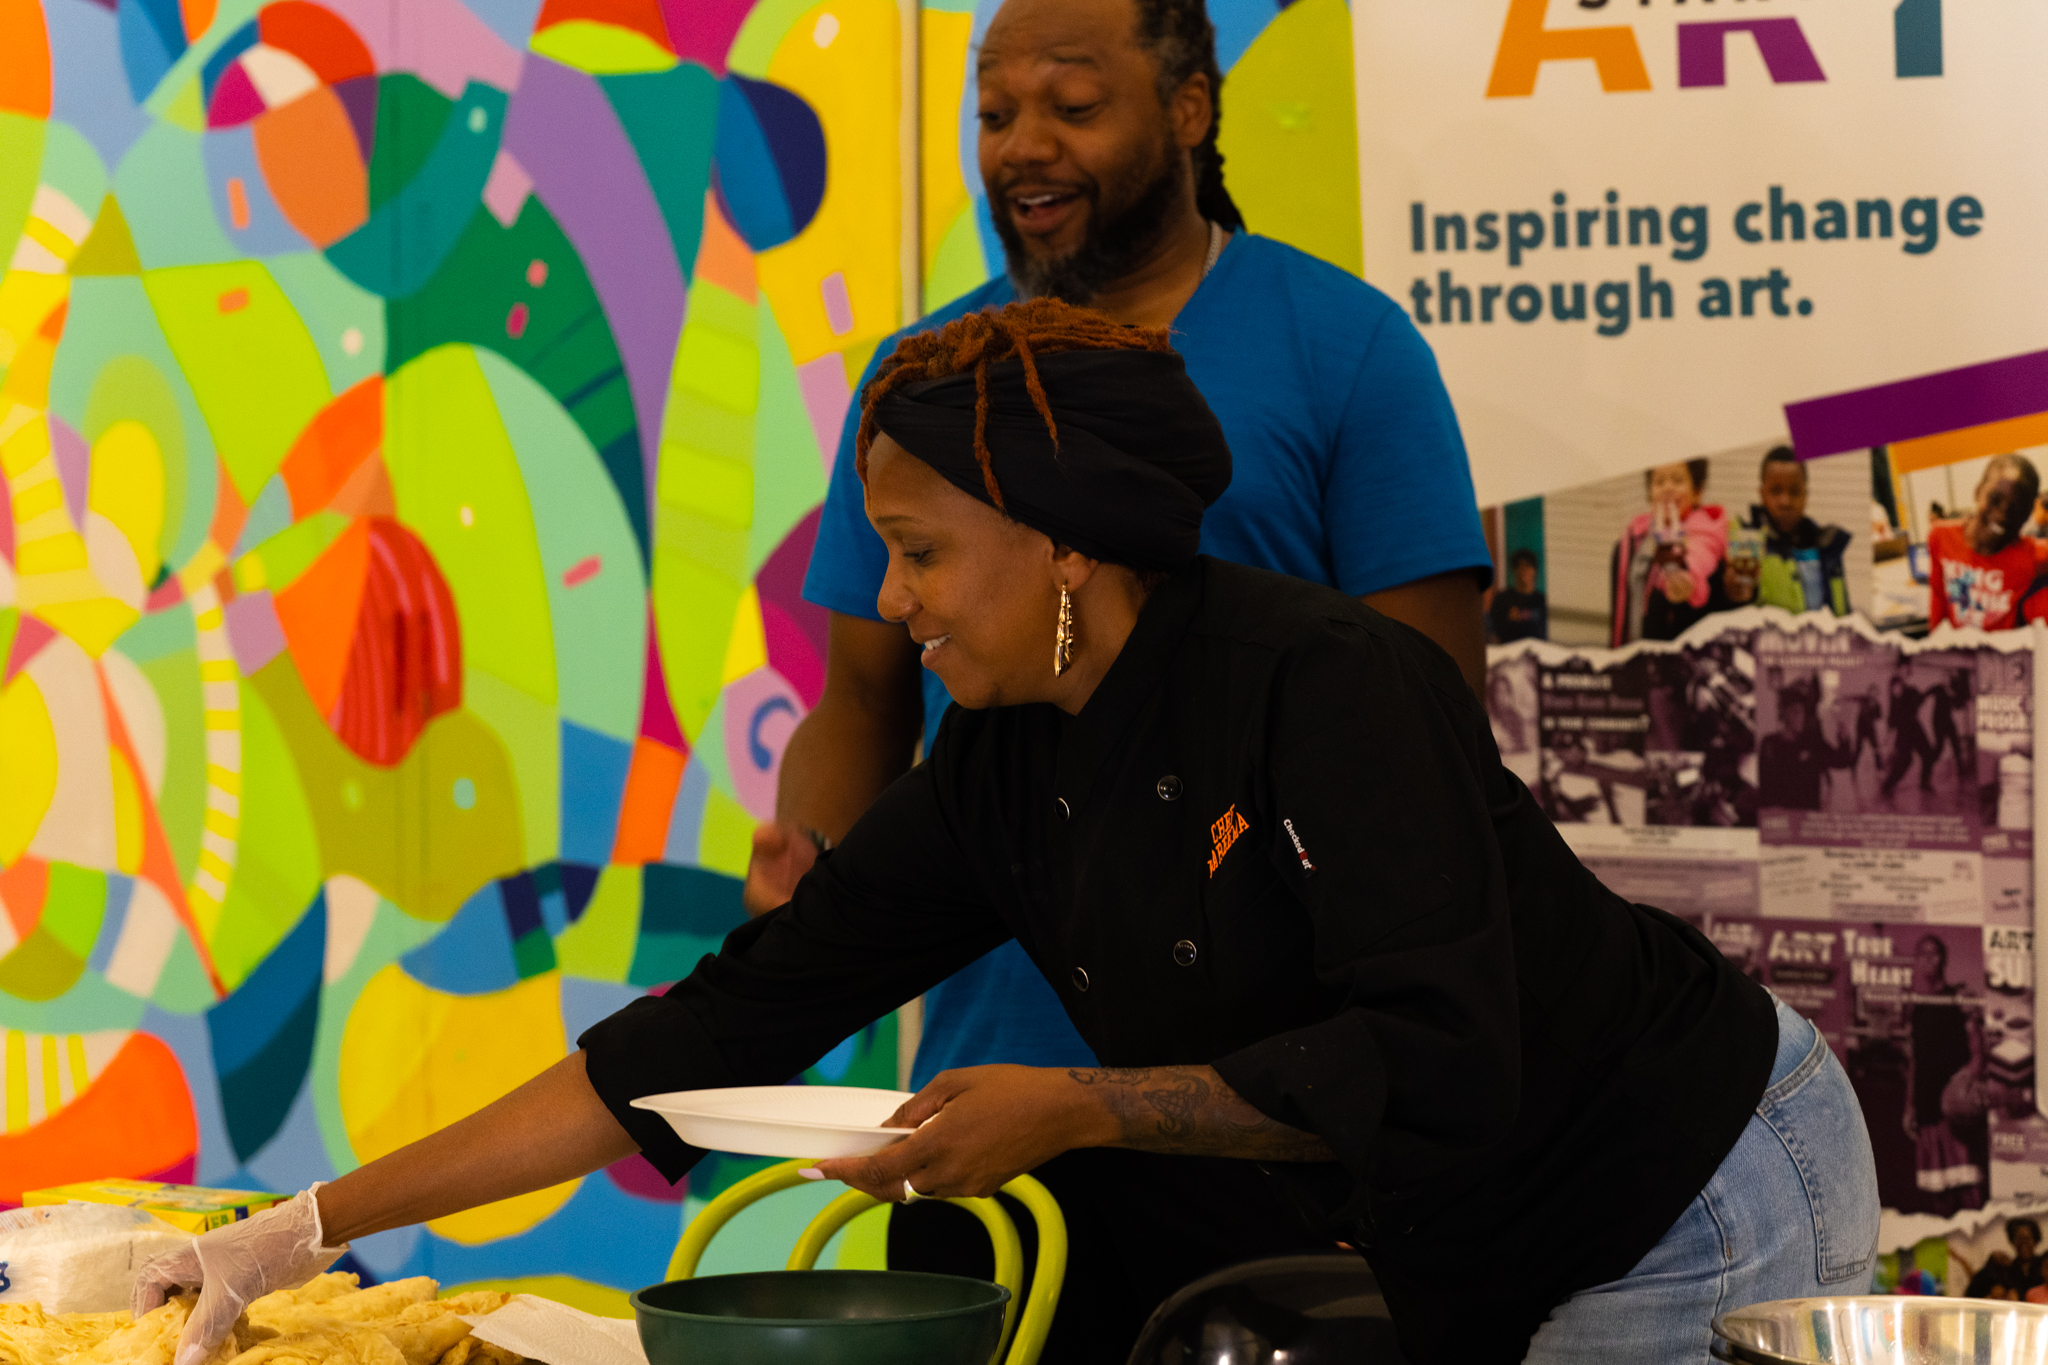 A Black chef reaching over a table to put food on a plate. There is a colourful mural in the background and a banner that says "Inspiring change through art"